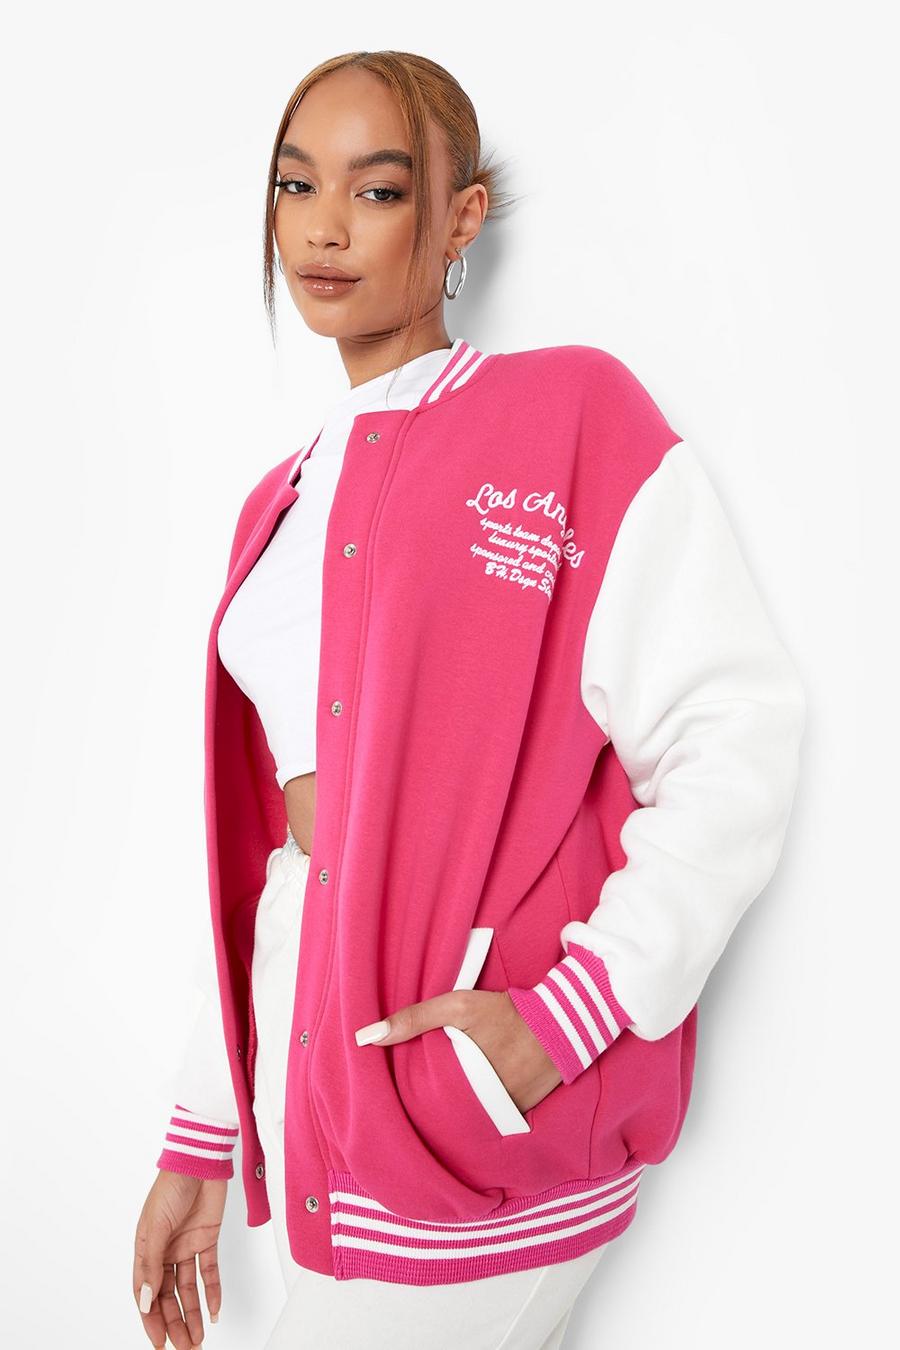 Bomber style universitaire Los Angeles, Hot pink rosa